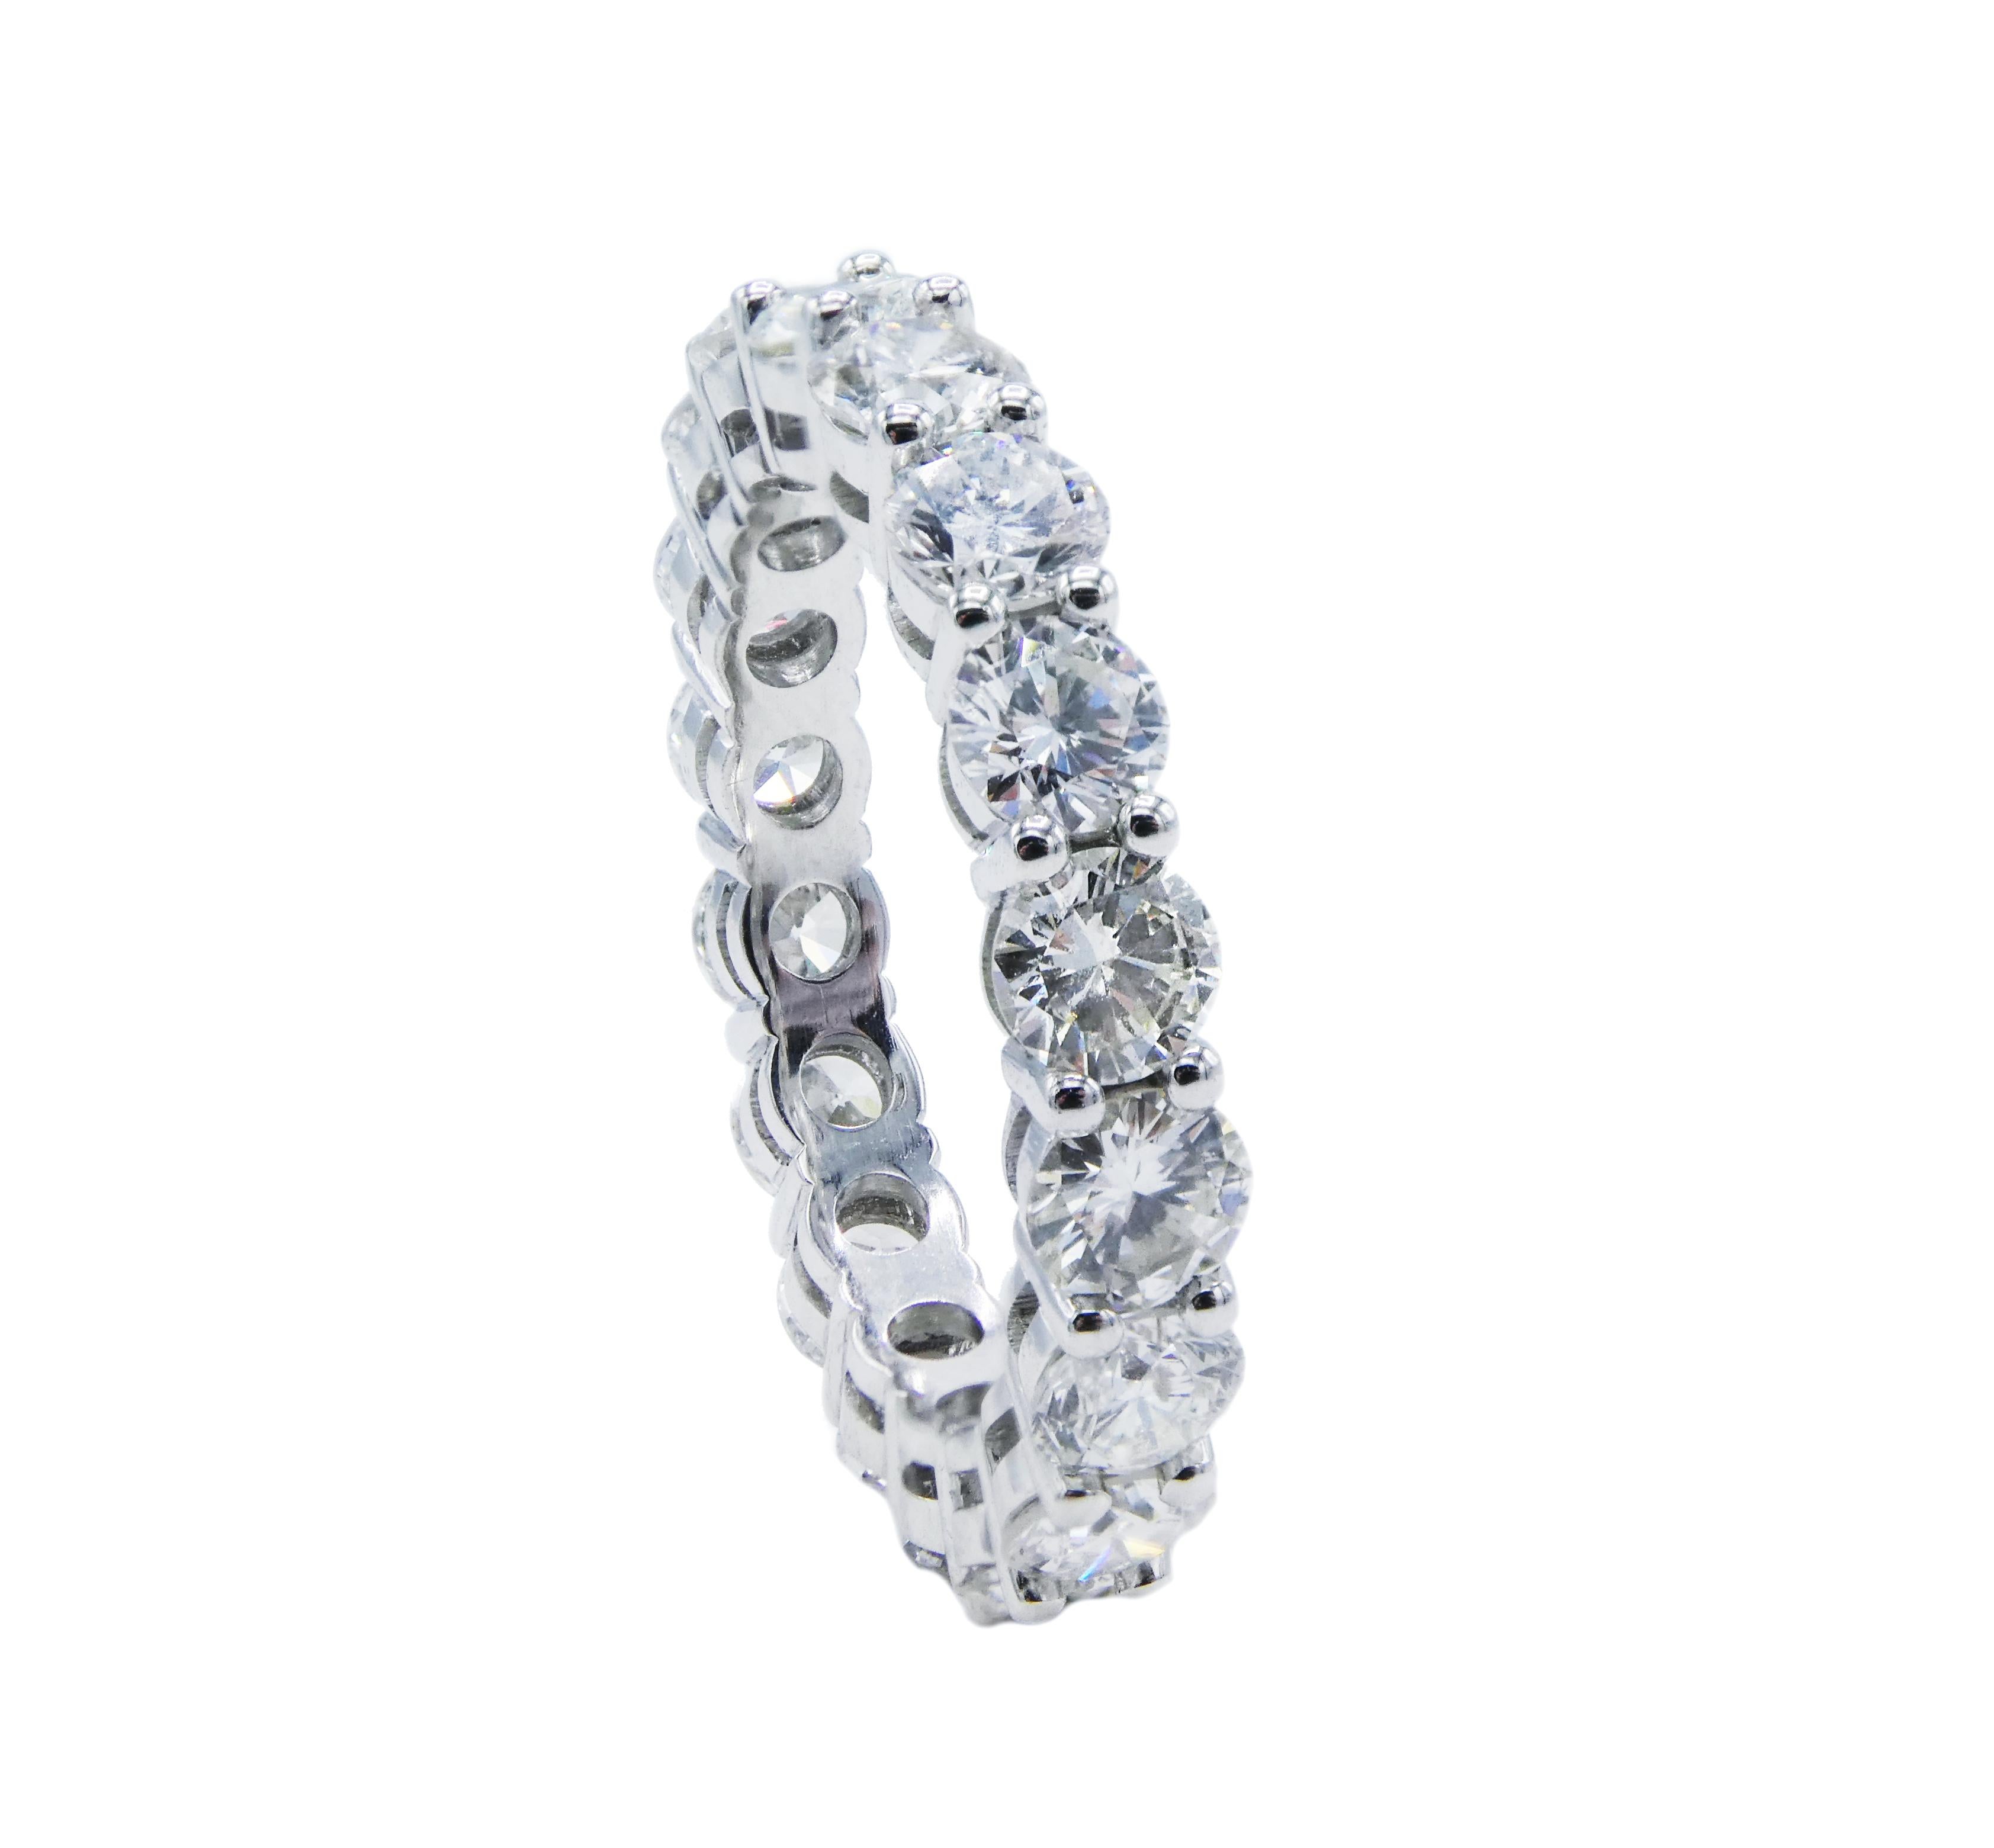 Platinum 3.27 Carat Round Diamond Eternity Band Ring Size 6.25

Metal: Platinum
Diamonds: 18 round diamonds, 3.27 CTW G VS - SI
Band is 3.7mm wide
Weight: 5.6 grams
Size: 6.25 (6 1/4) US
Excellent condition